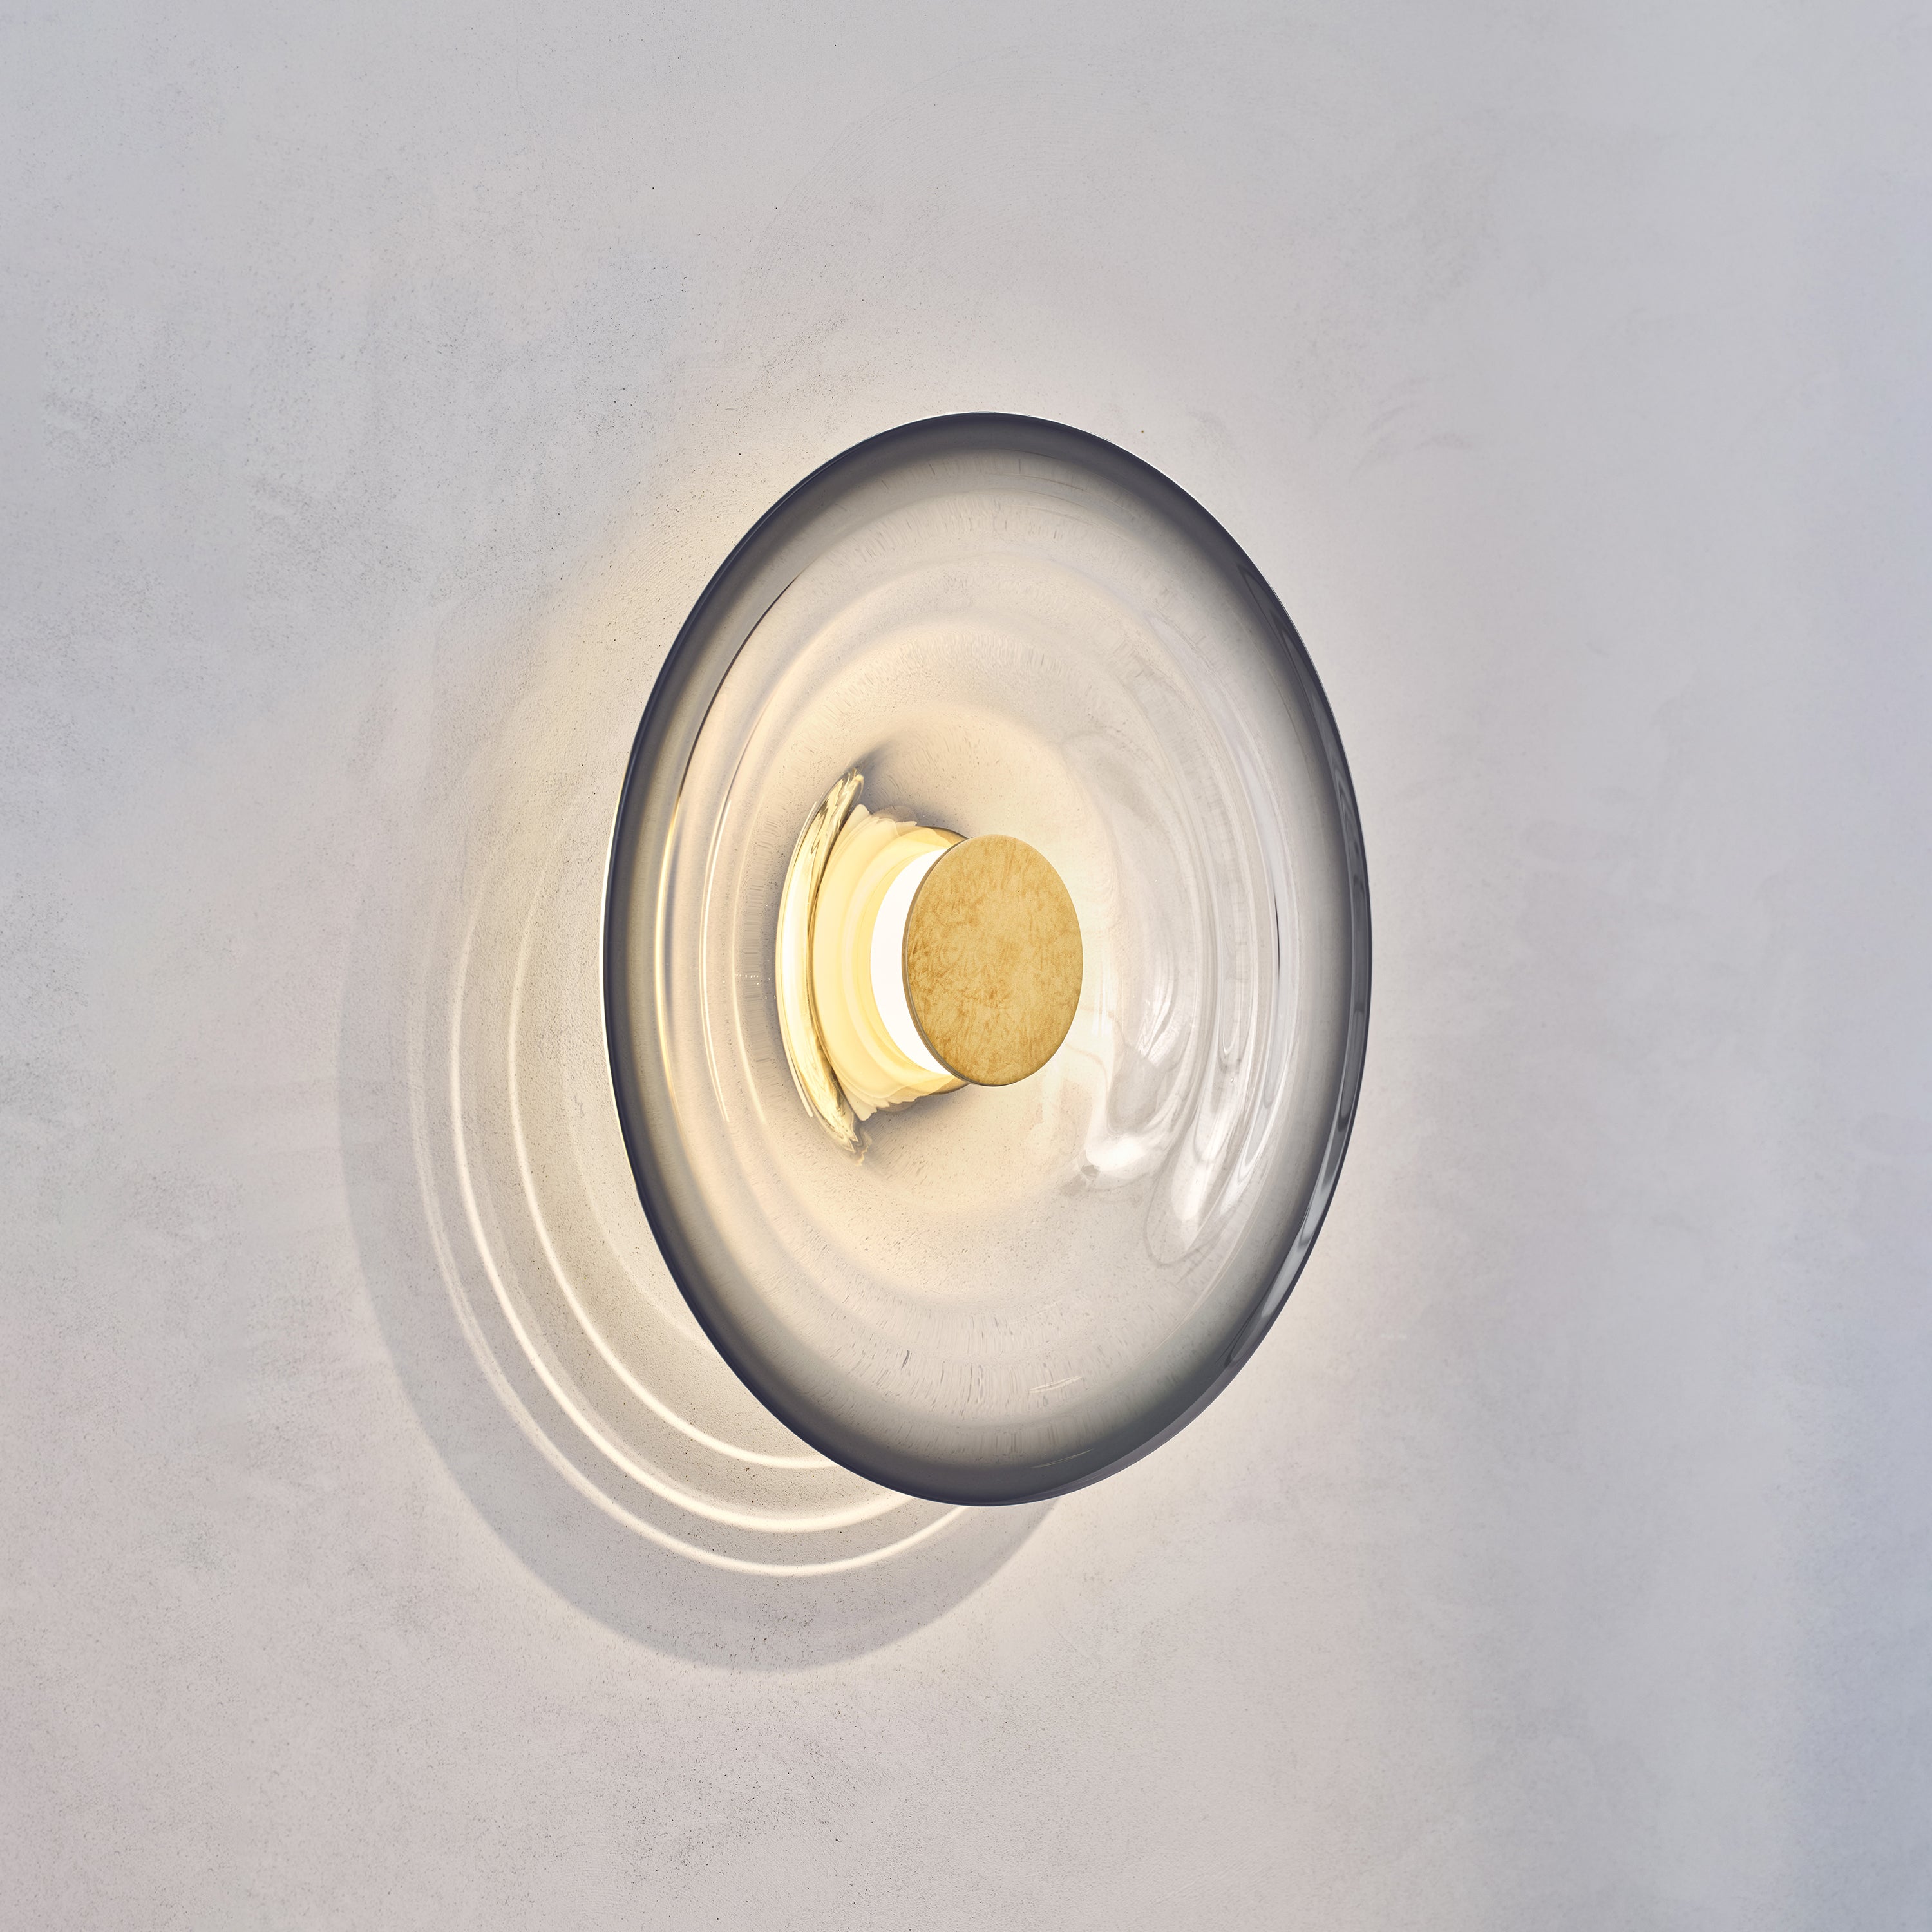 'Liquid Smoke' Hand-Blown Glass & Aged Brass Contemporary Wall Light, Sconce For Sale